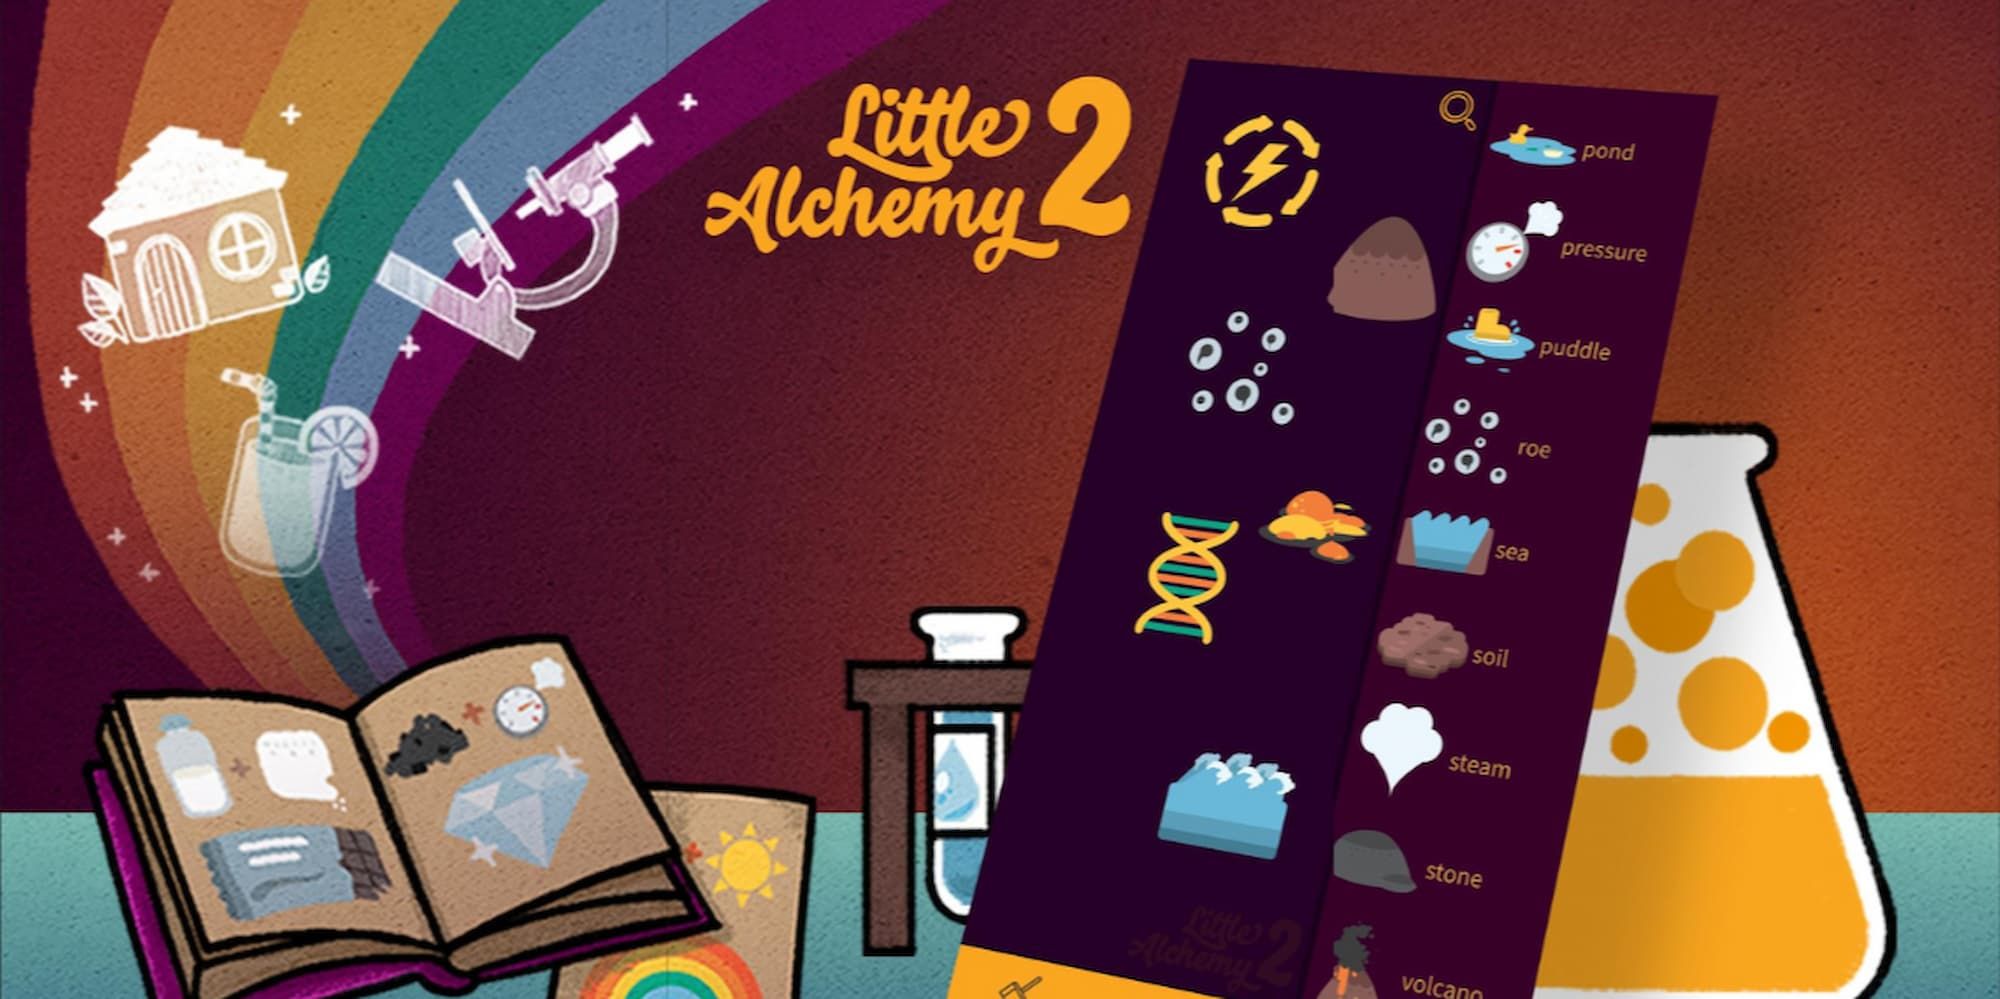 The Complete Little Alchemy 2 Recipe List